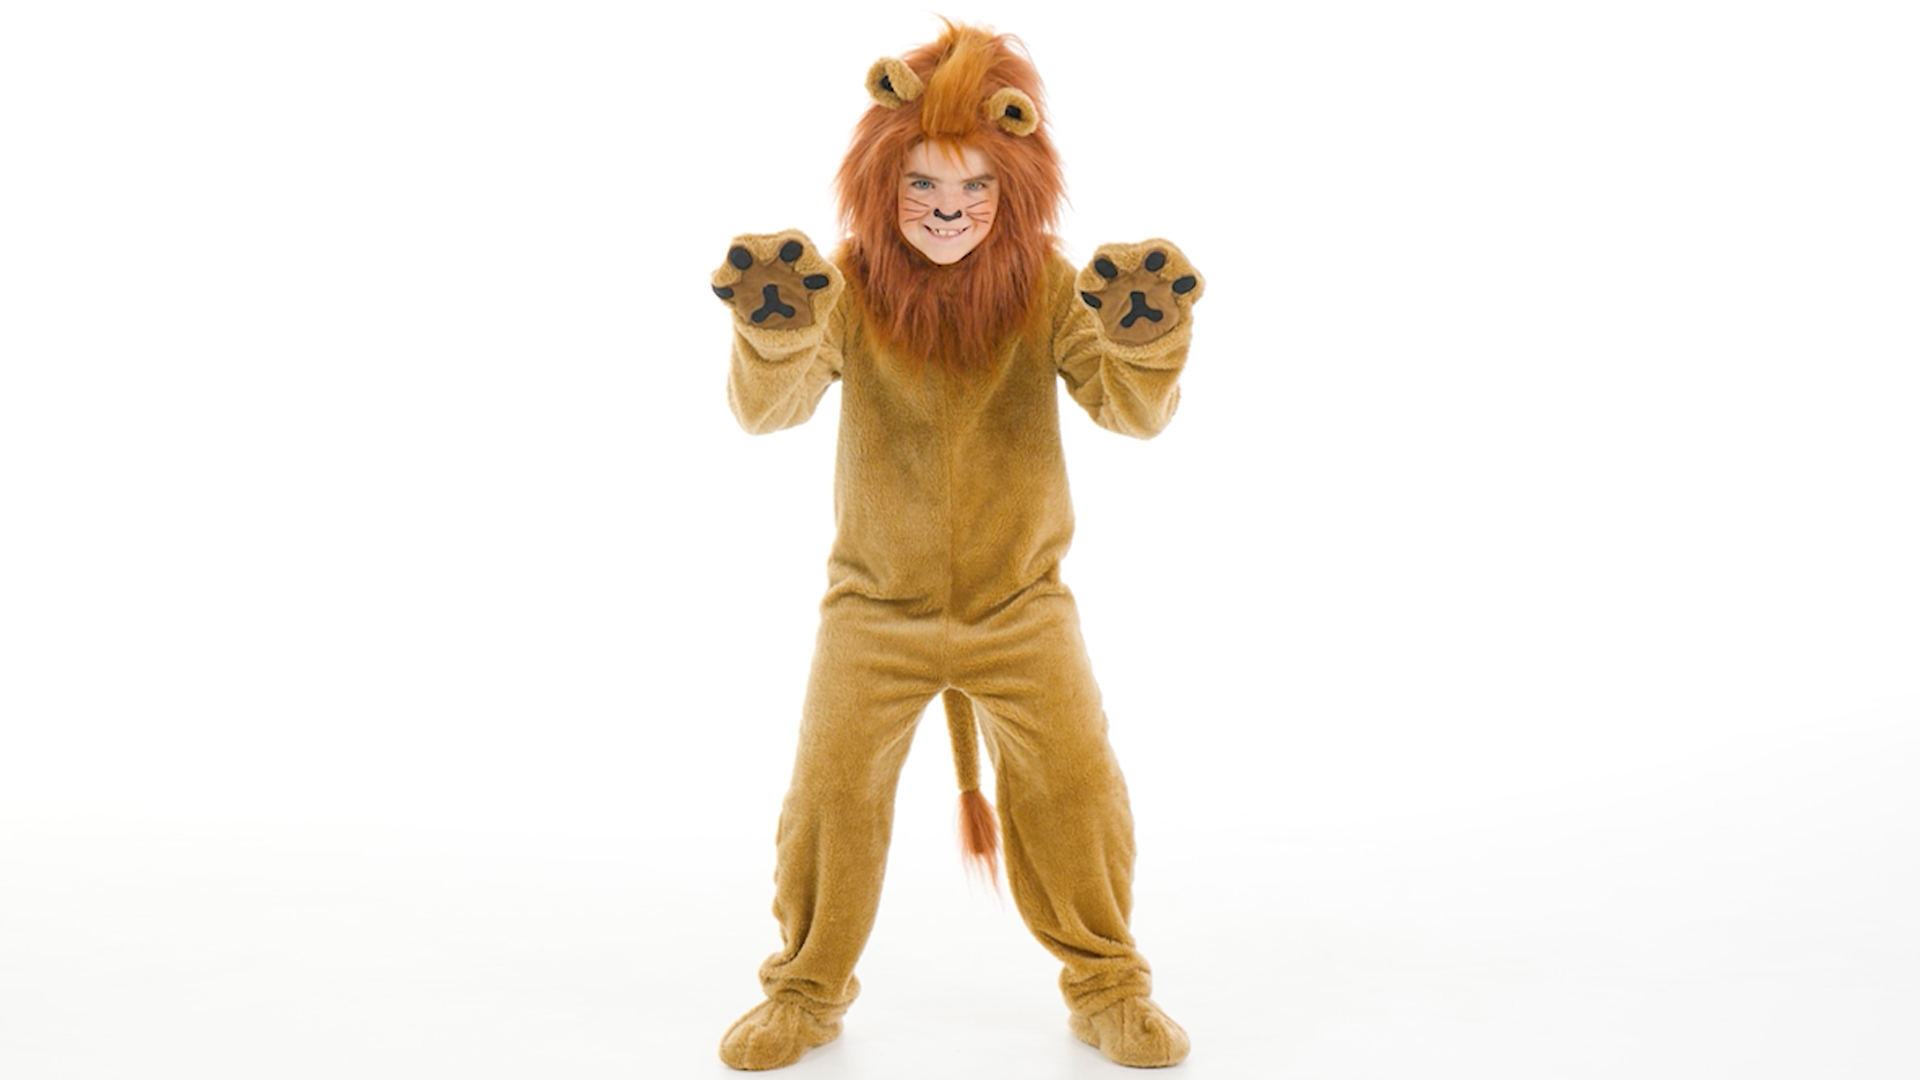 Roar! Be ferocious while you wear this Child Deluxe Lion Costume.